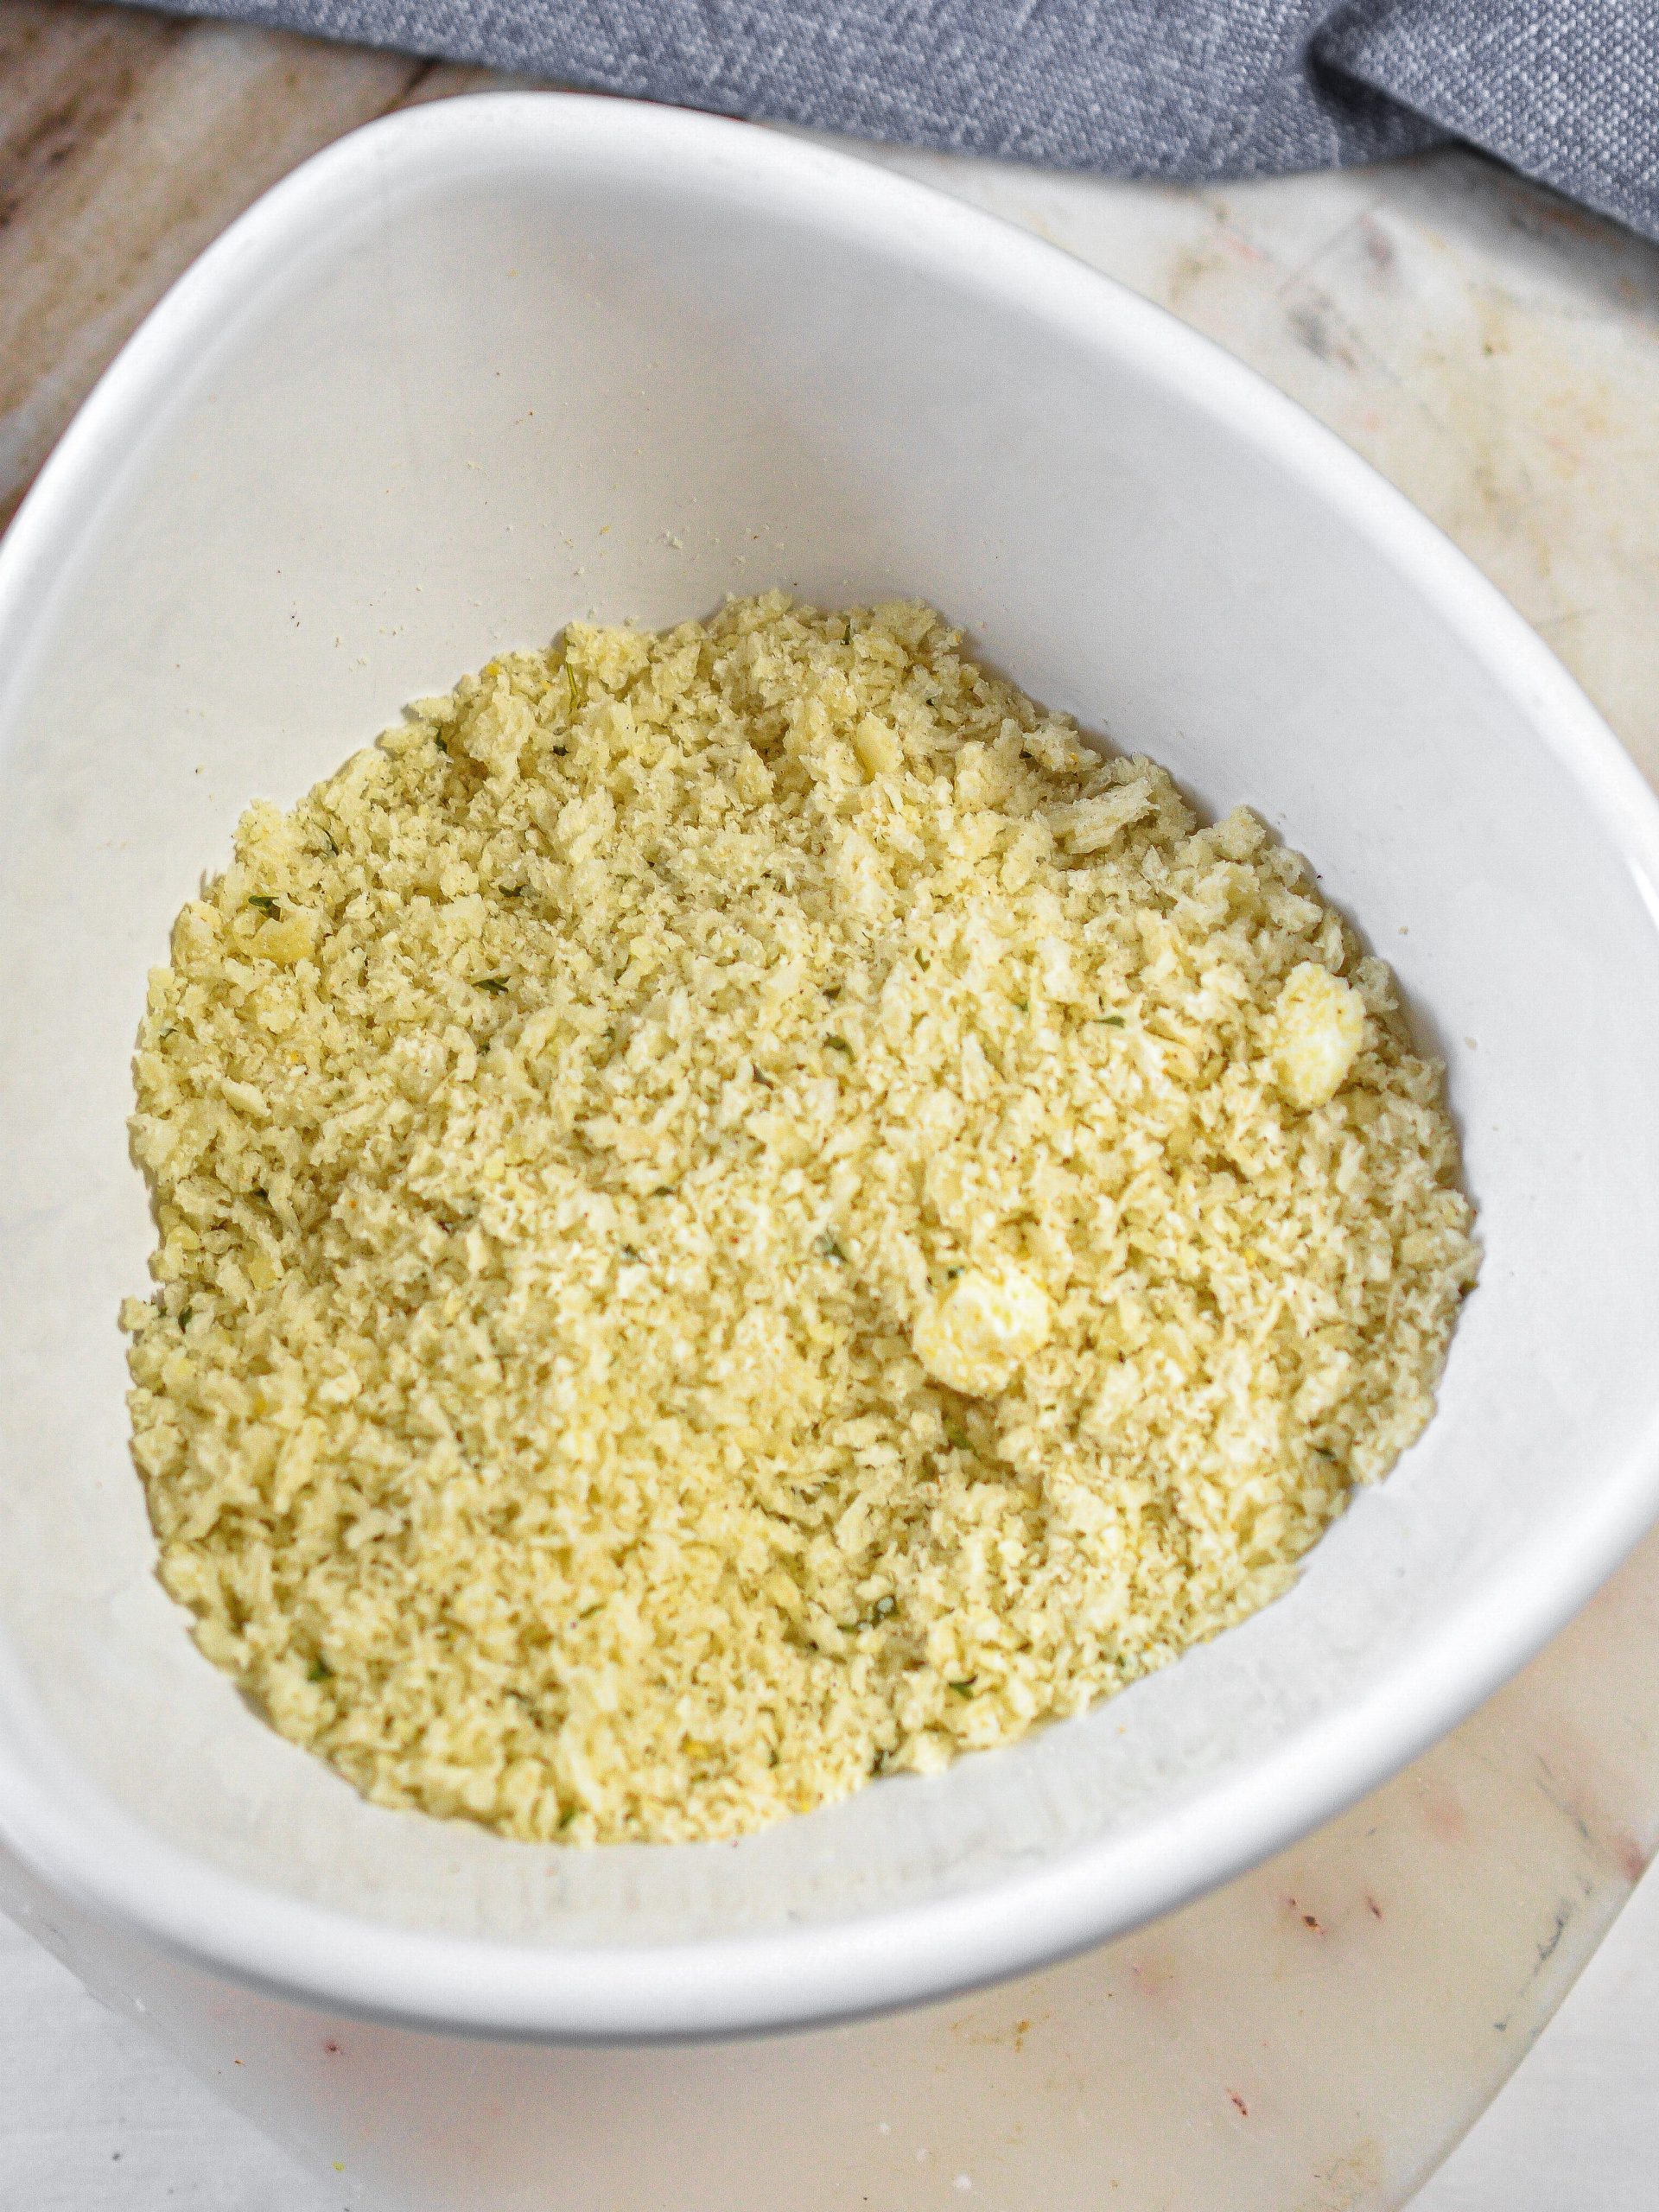 In a bowl, combine the breadcrumbs and parmesan cheese.